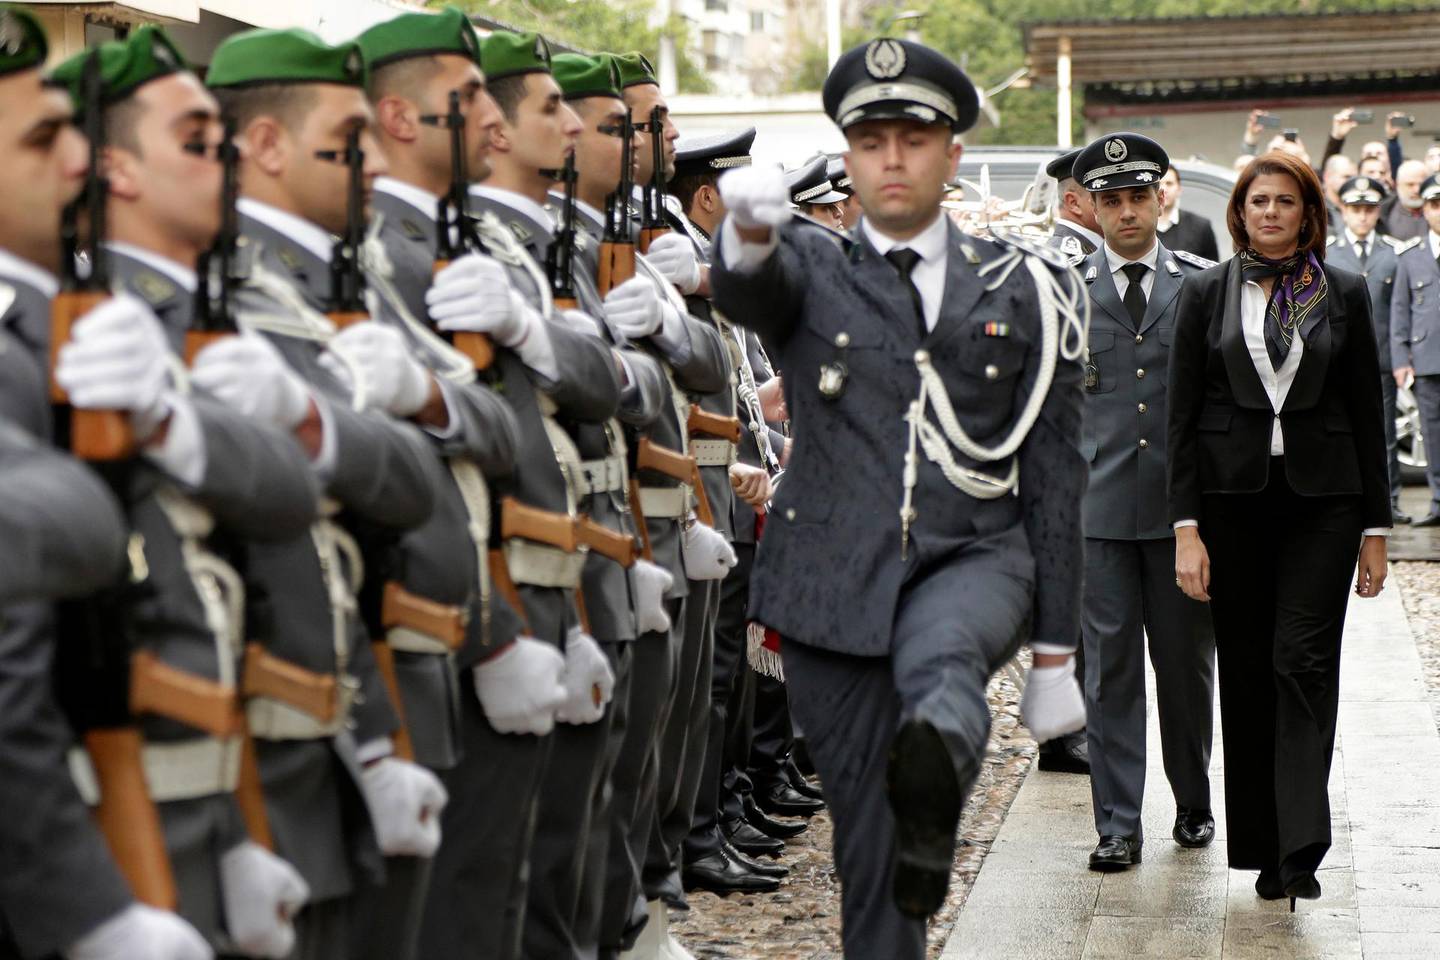 Newly appointed Interior Minister Raya El Hassan, right, reviews an honor guard during a ceremony held on her first day at the interior ministry, in Beirut, Lebanon, Wednesday, Feb. 6, 2019. El Hassan is one of four women in the new 30-member Cabinet, becoming the country and the Arab world's first female official in charge of the powerful security agencies. (AP Photo/Hassan Ammar)